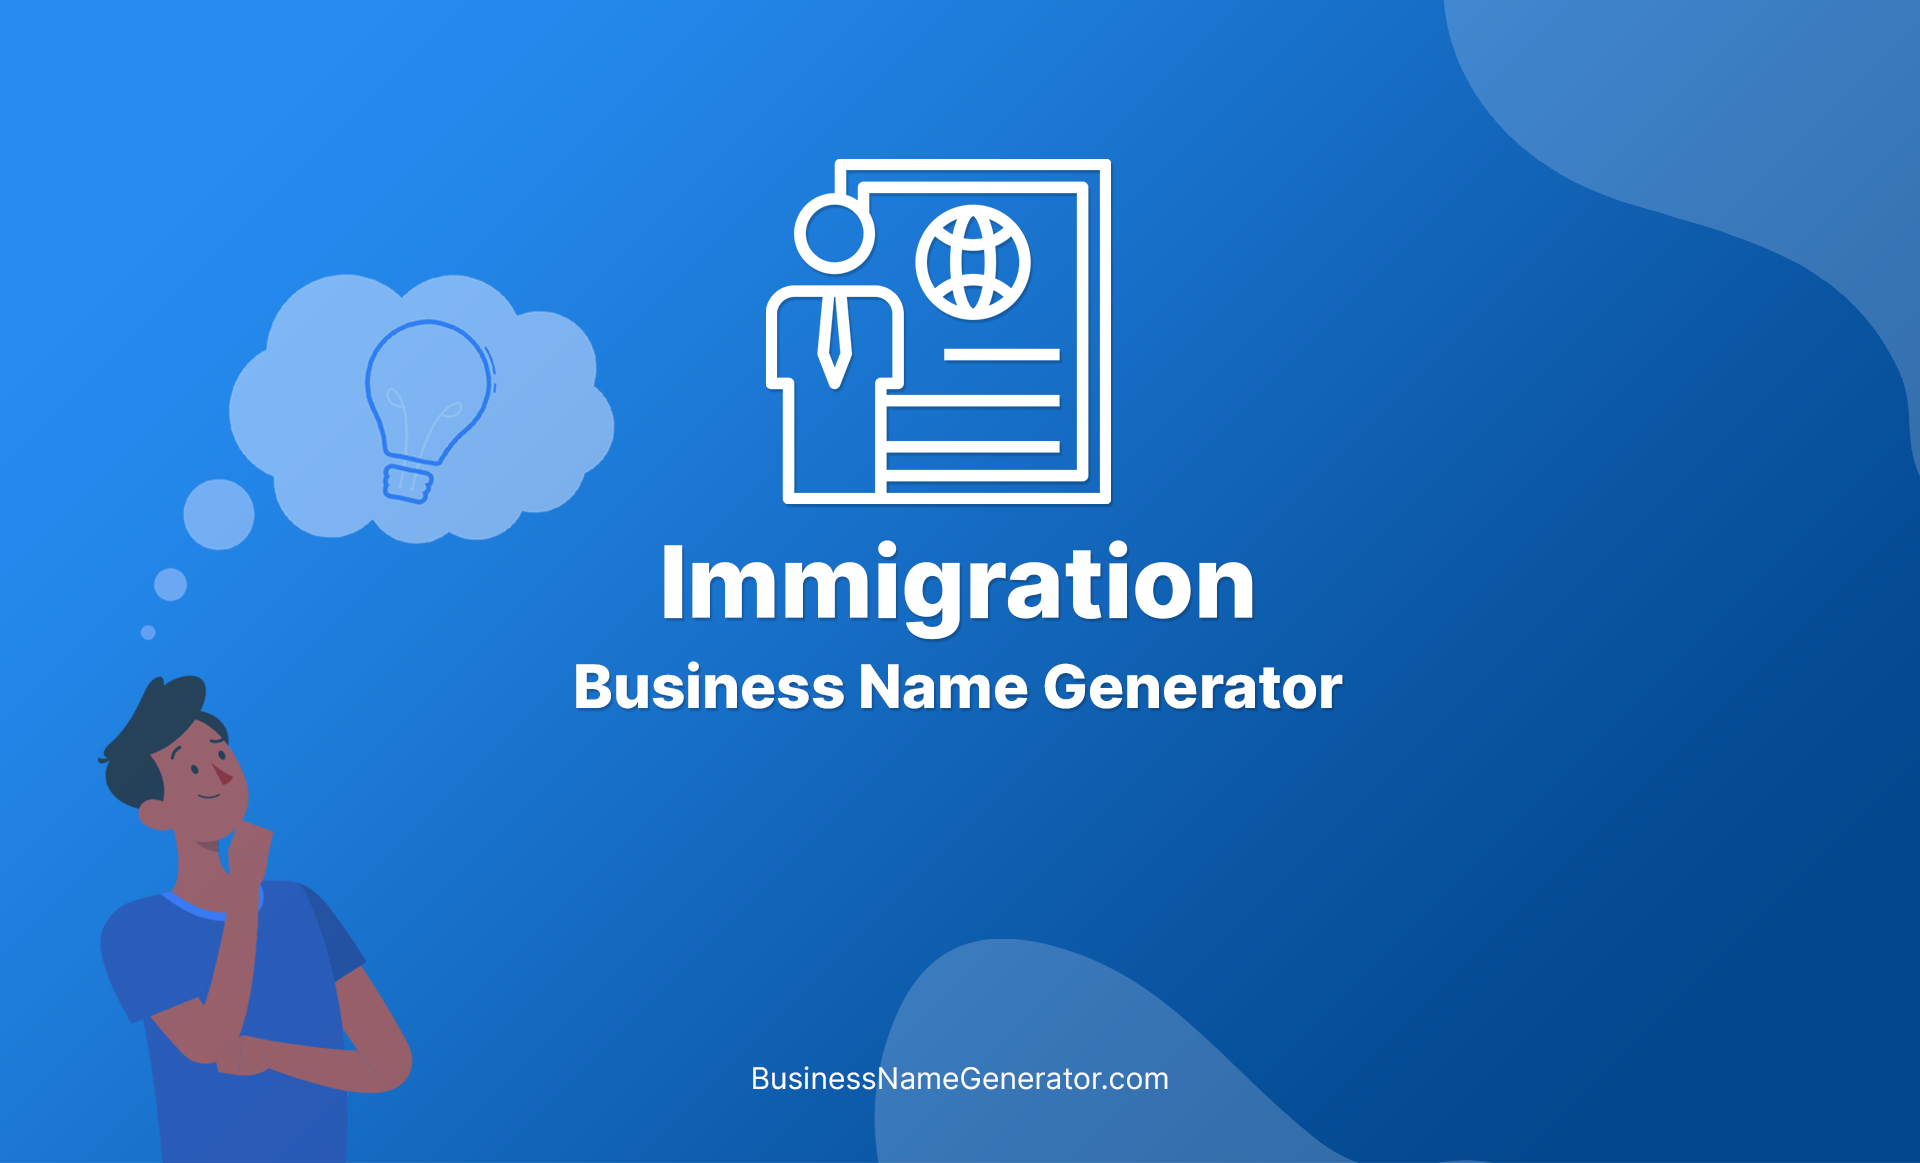 Immigration Business Name Generator